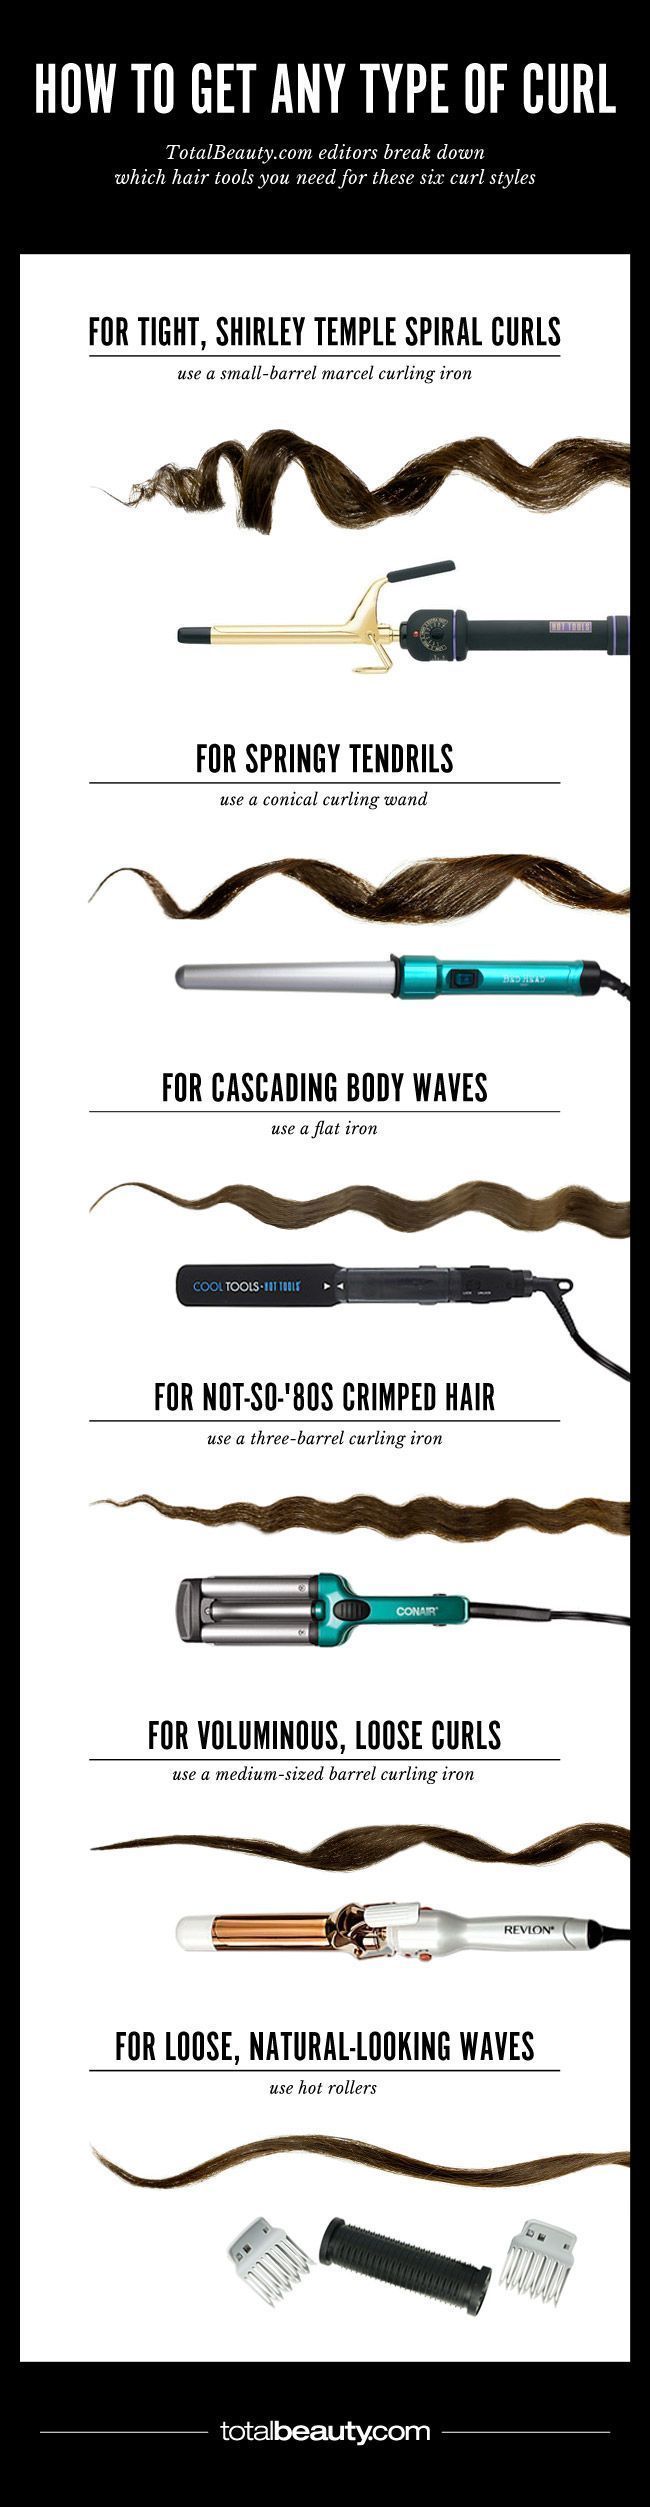 6 Curling Irons For Any Type Of Curl